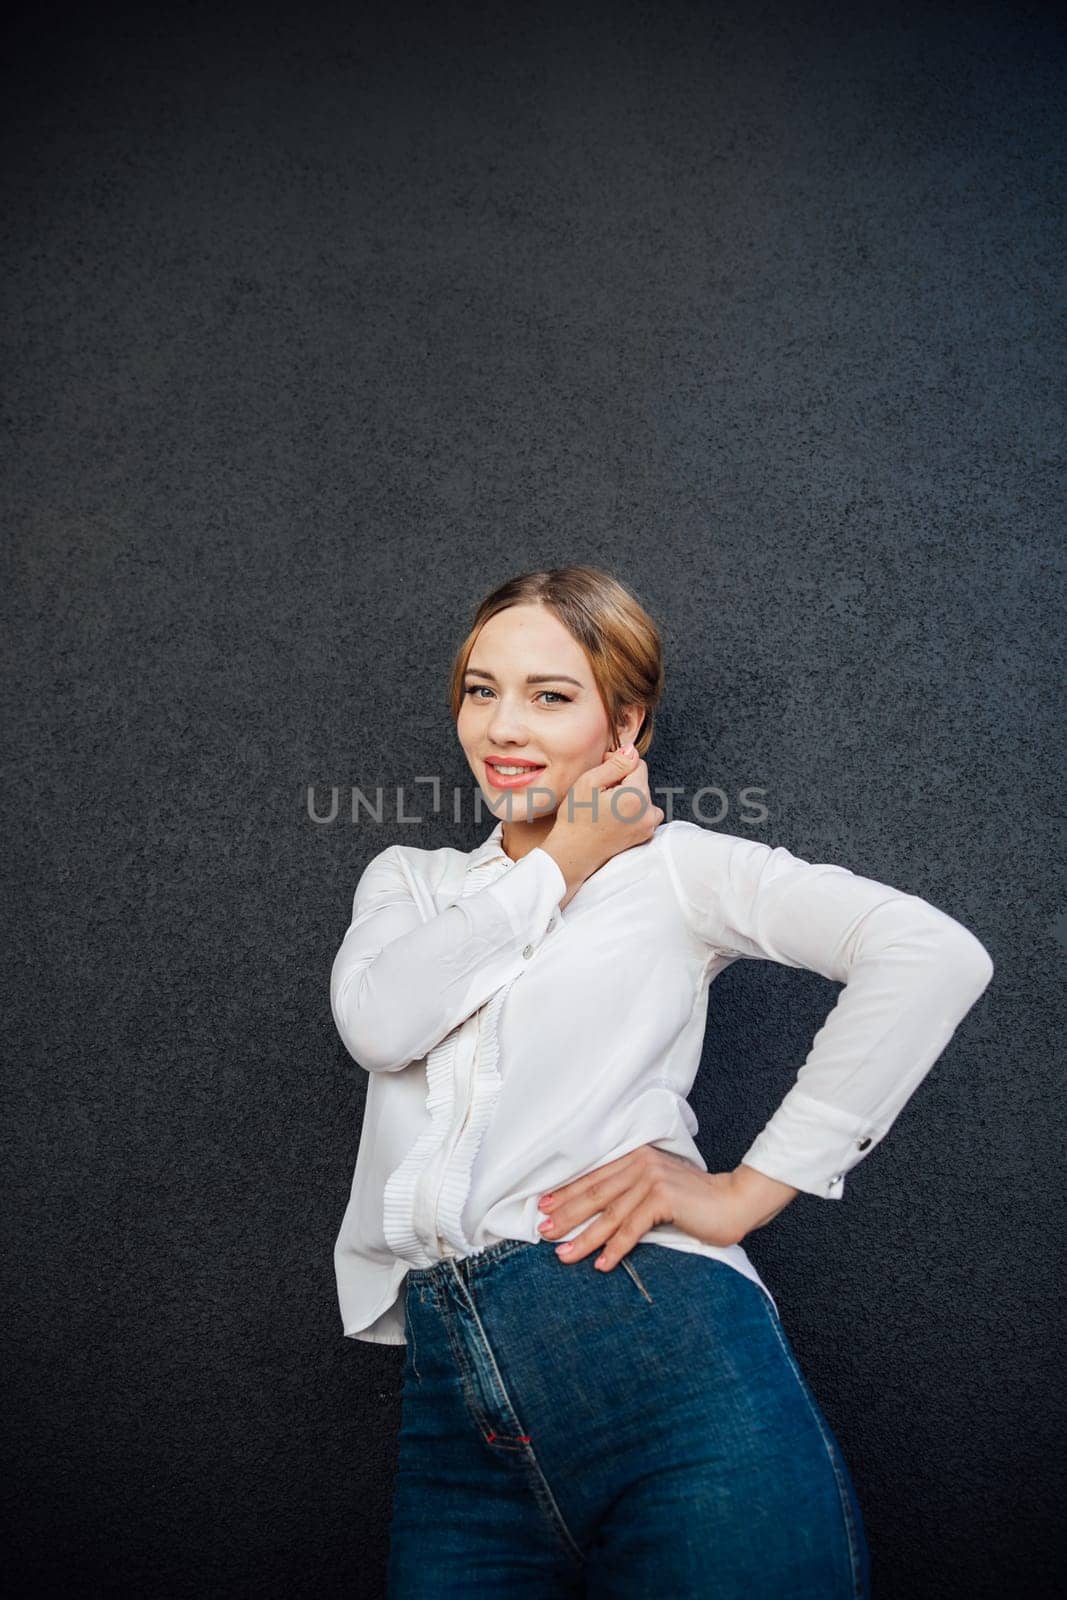 a fashionable woman in jeans poses against a black wall by Simakov